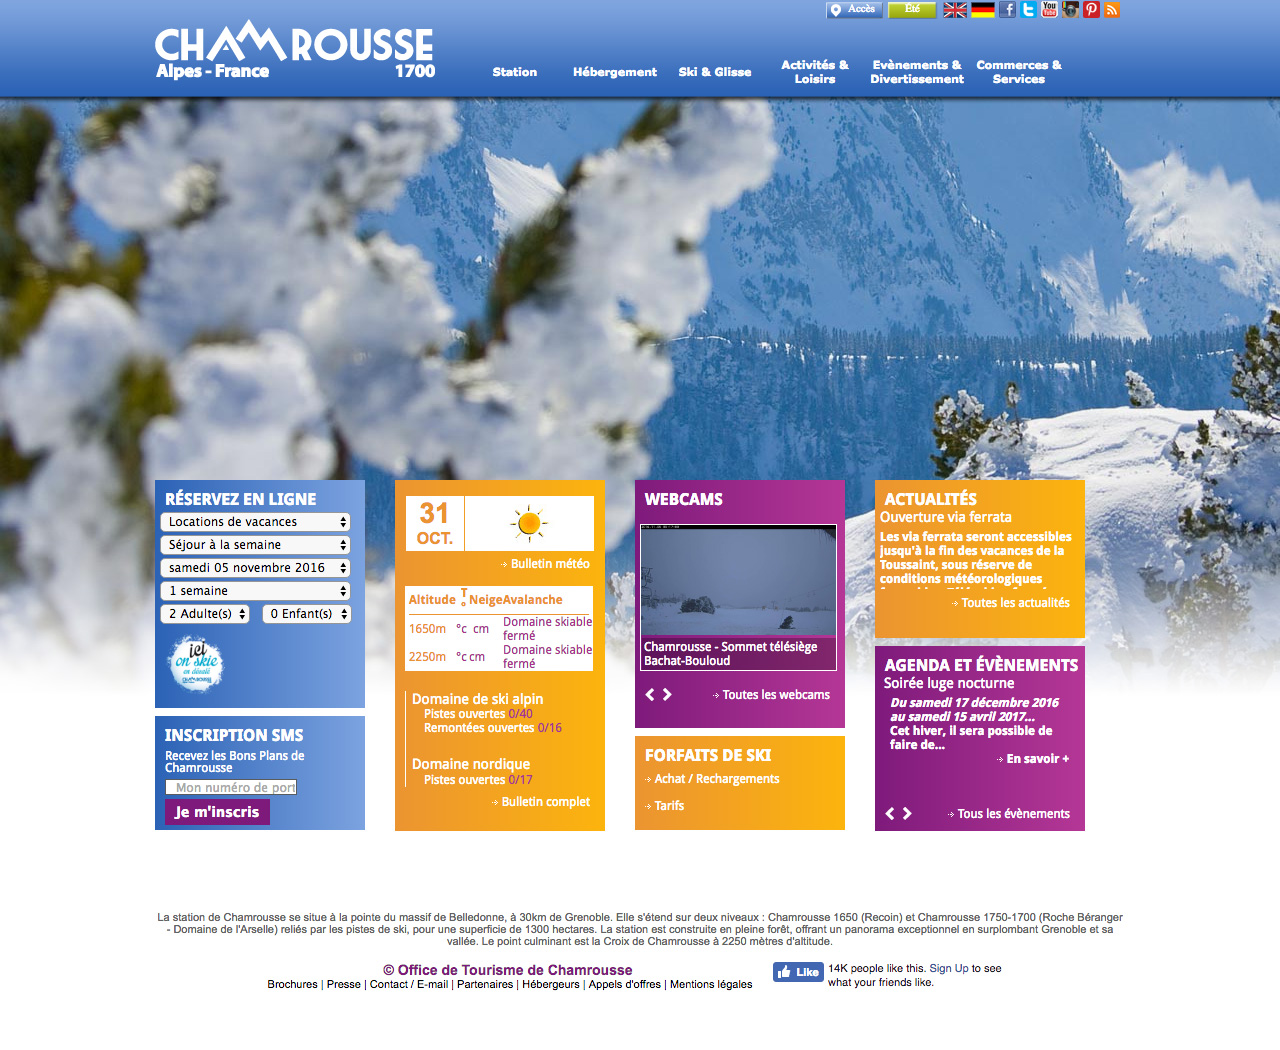 Chamrousse Tourism Office website from 2010